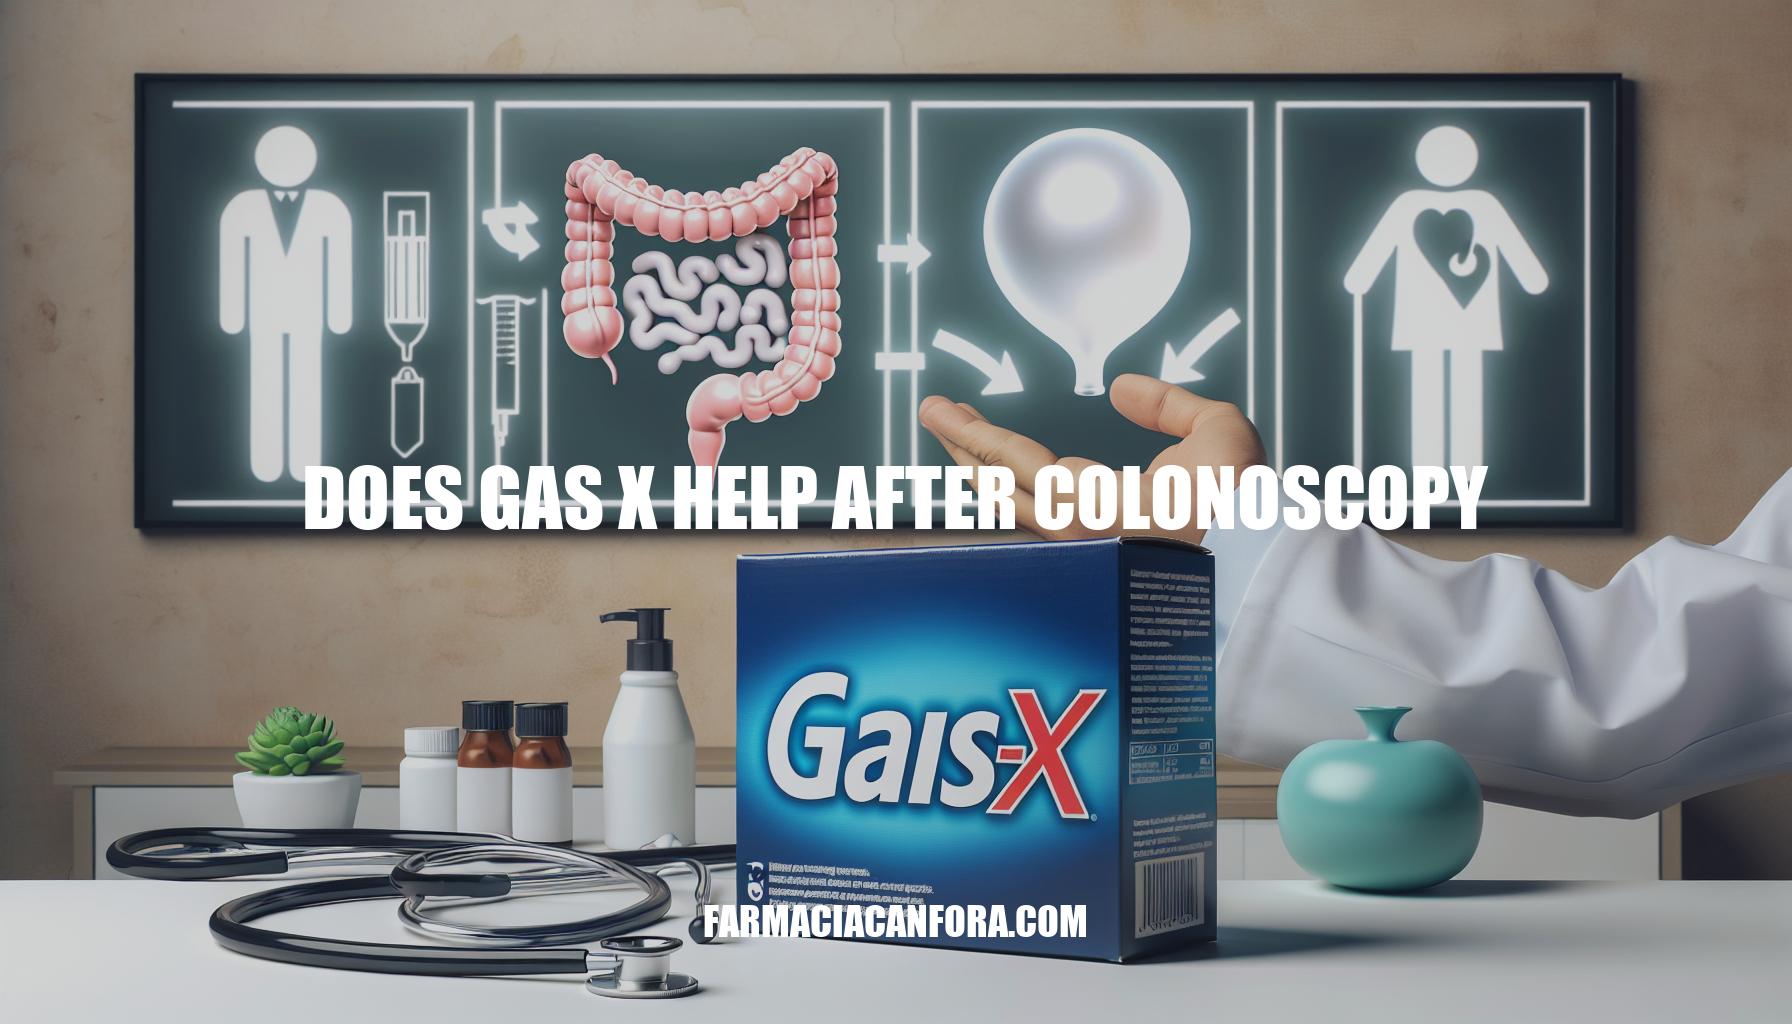 Does Gas-X Help After Colonoscopy